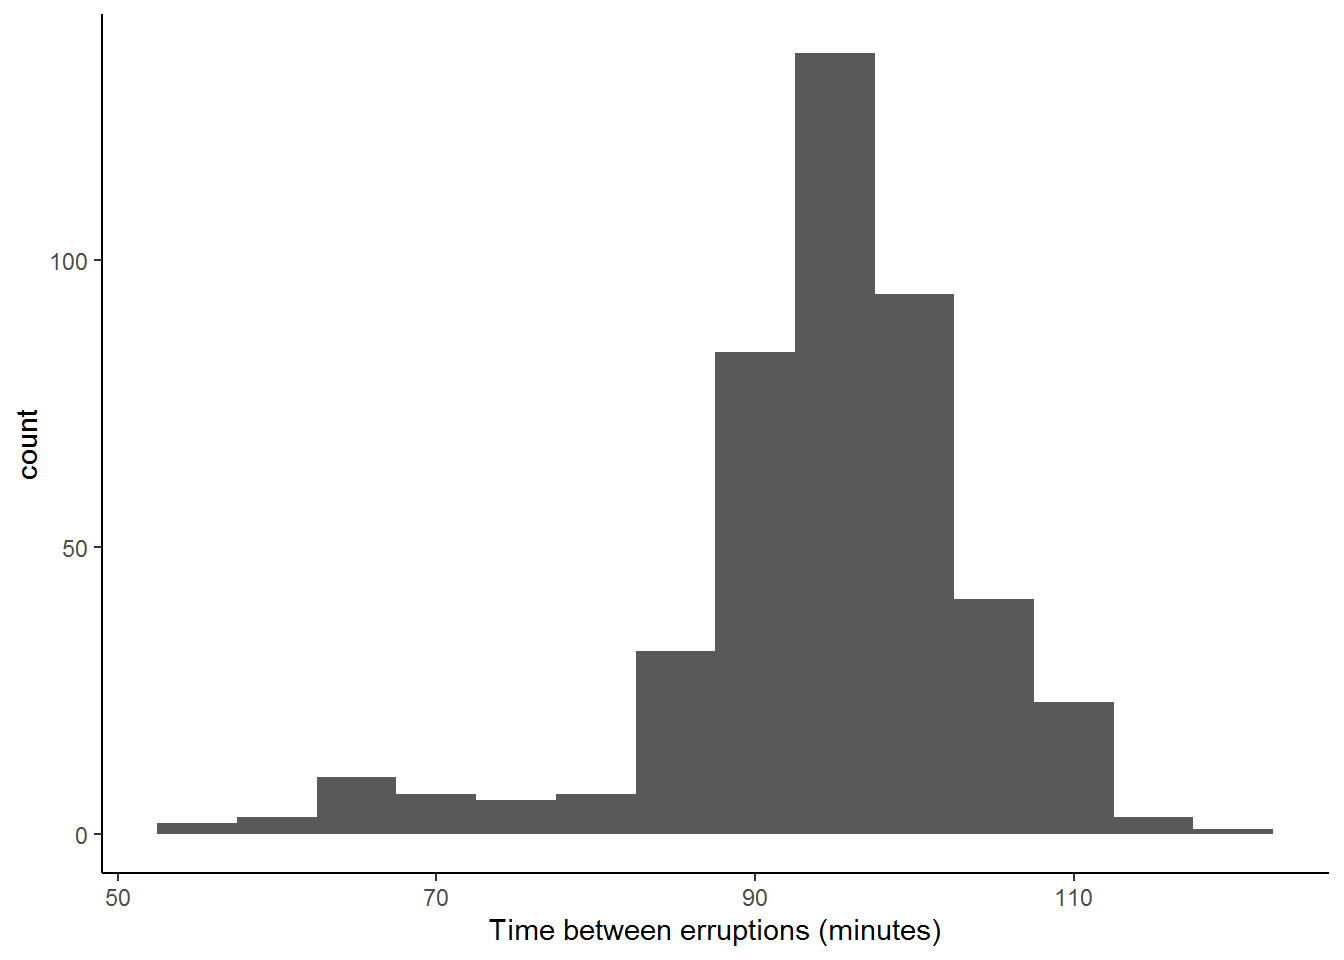 Histogram with 5 minute binwidth using R and ggplot2